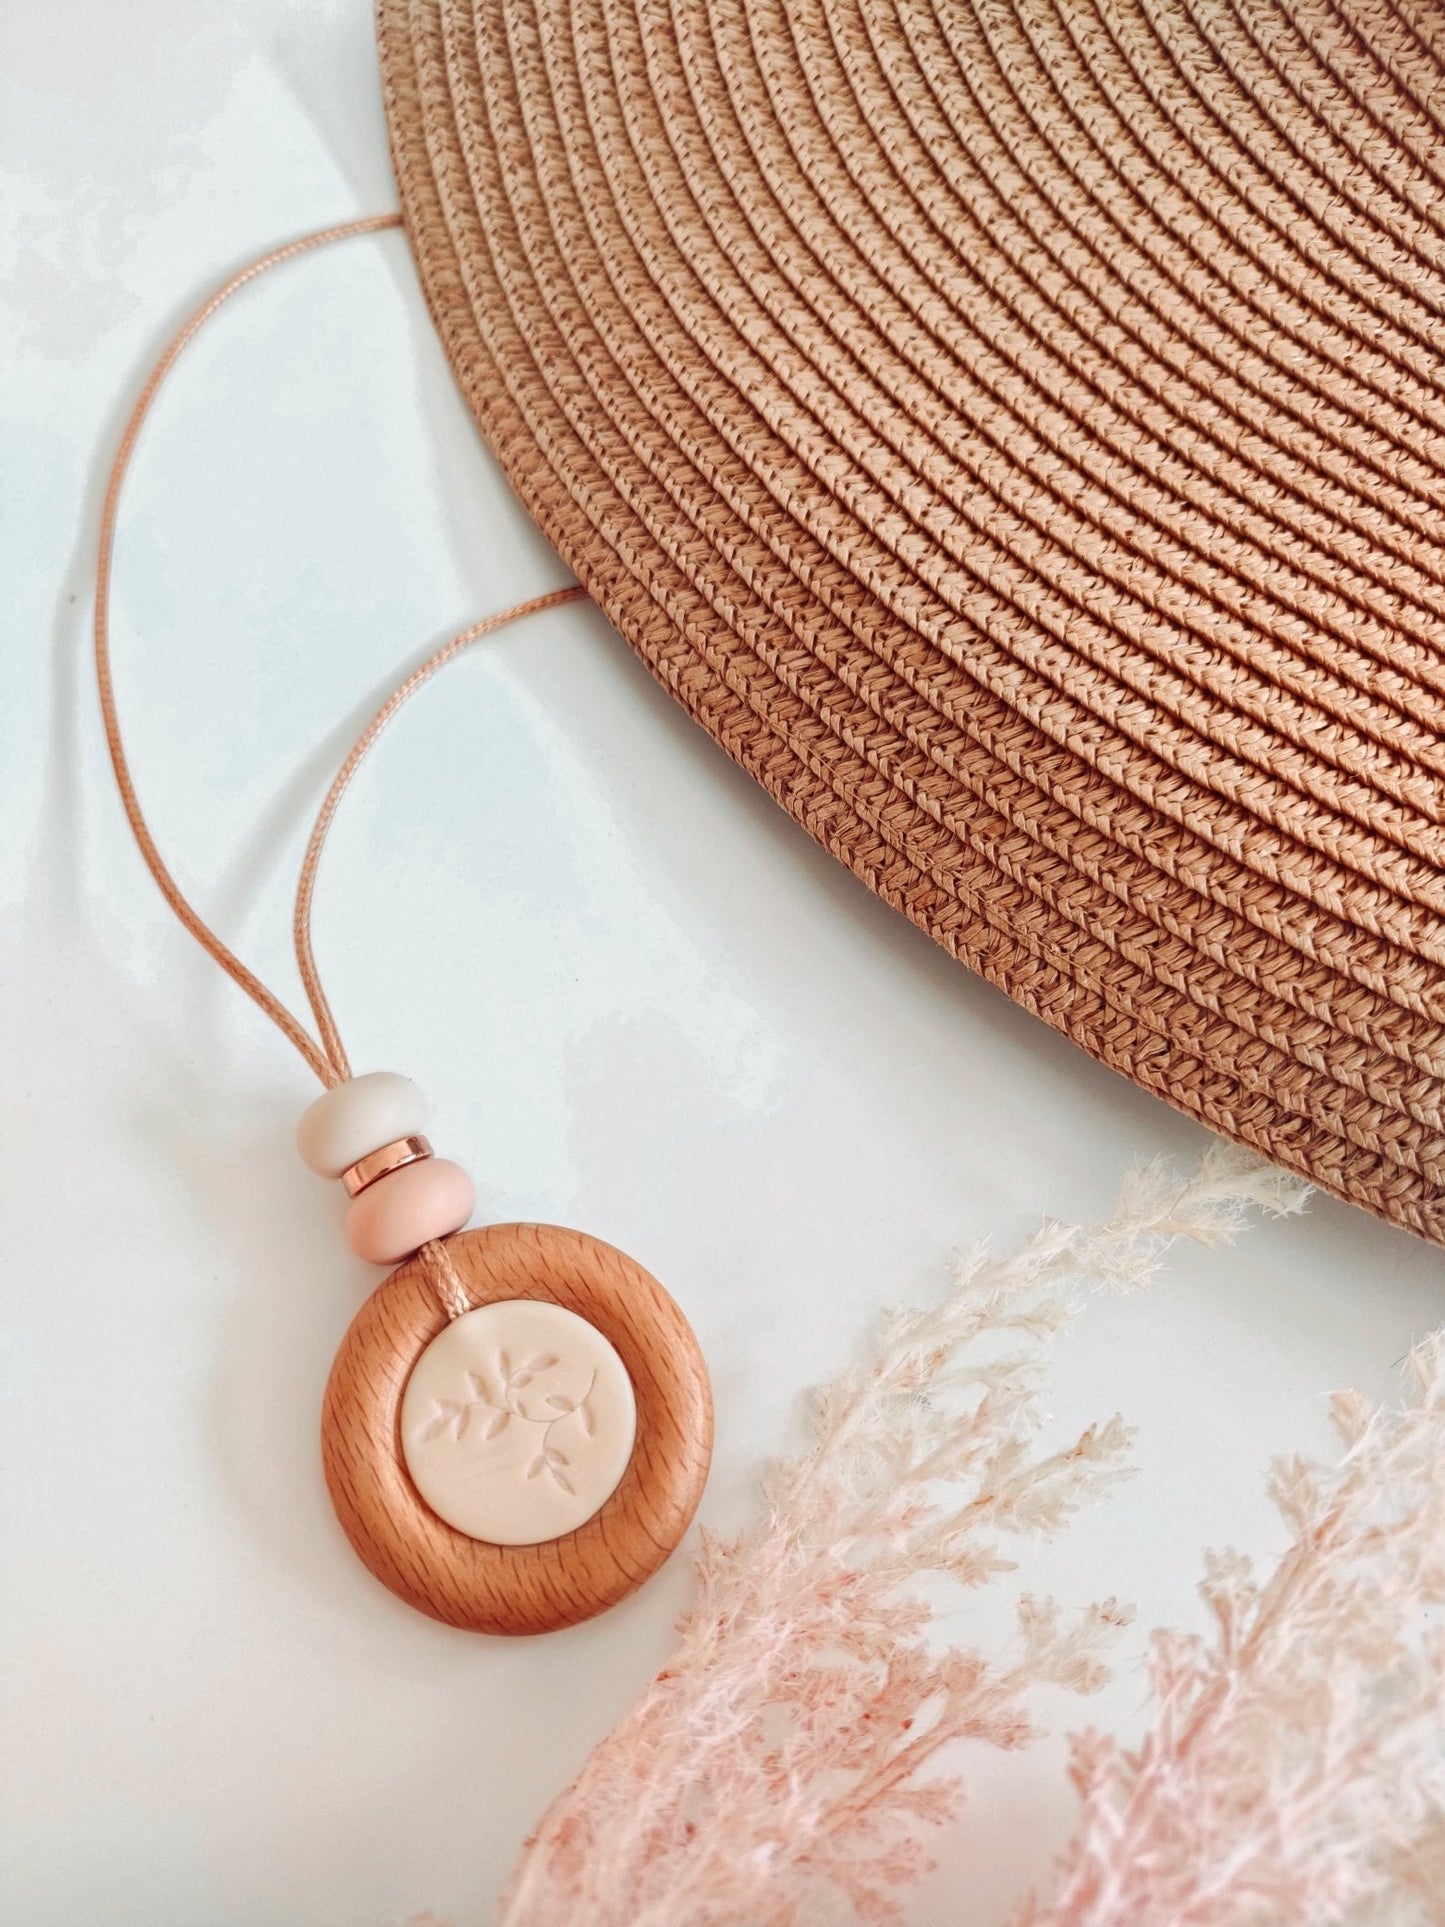 Fern Embossed Pendant - Bennie Blooms Breastfeeding, Teething and Fiddle Jewellery at its finest.